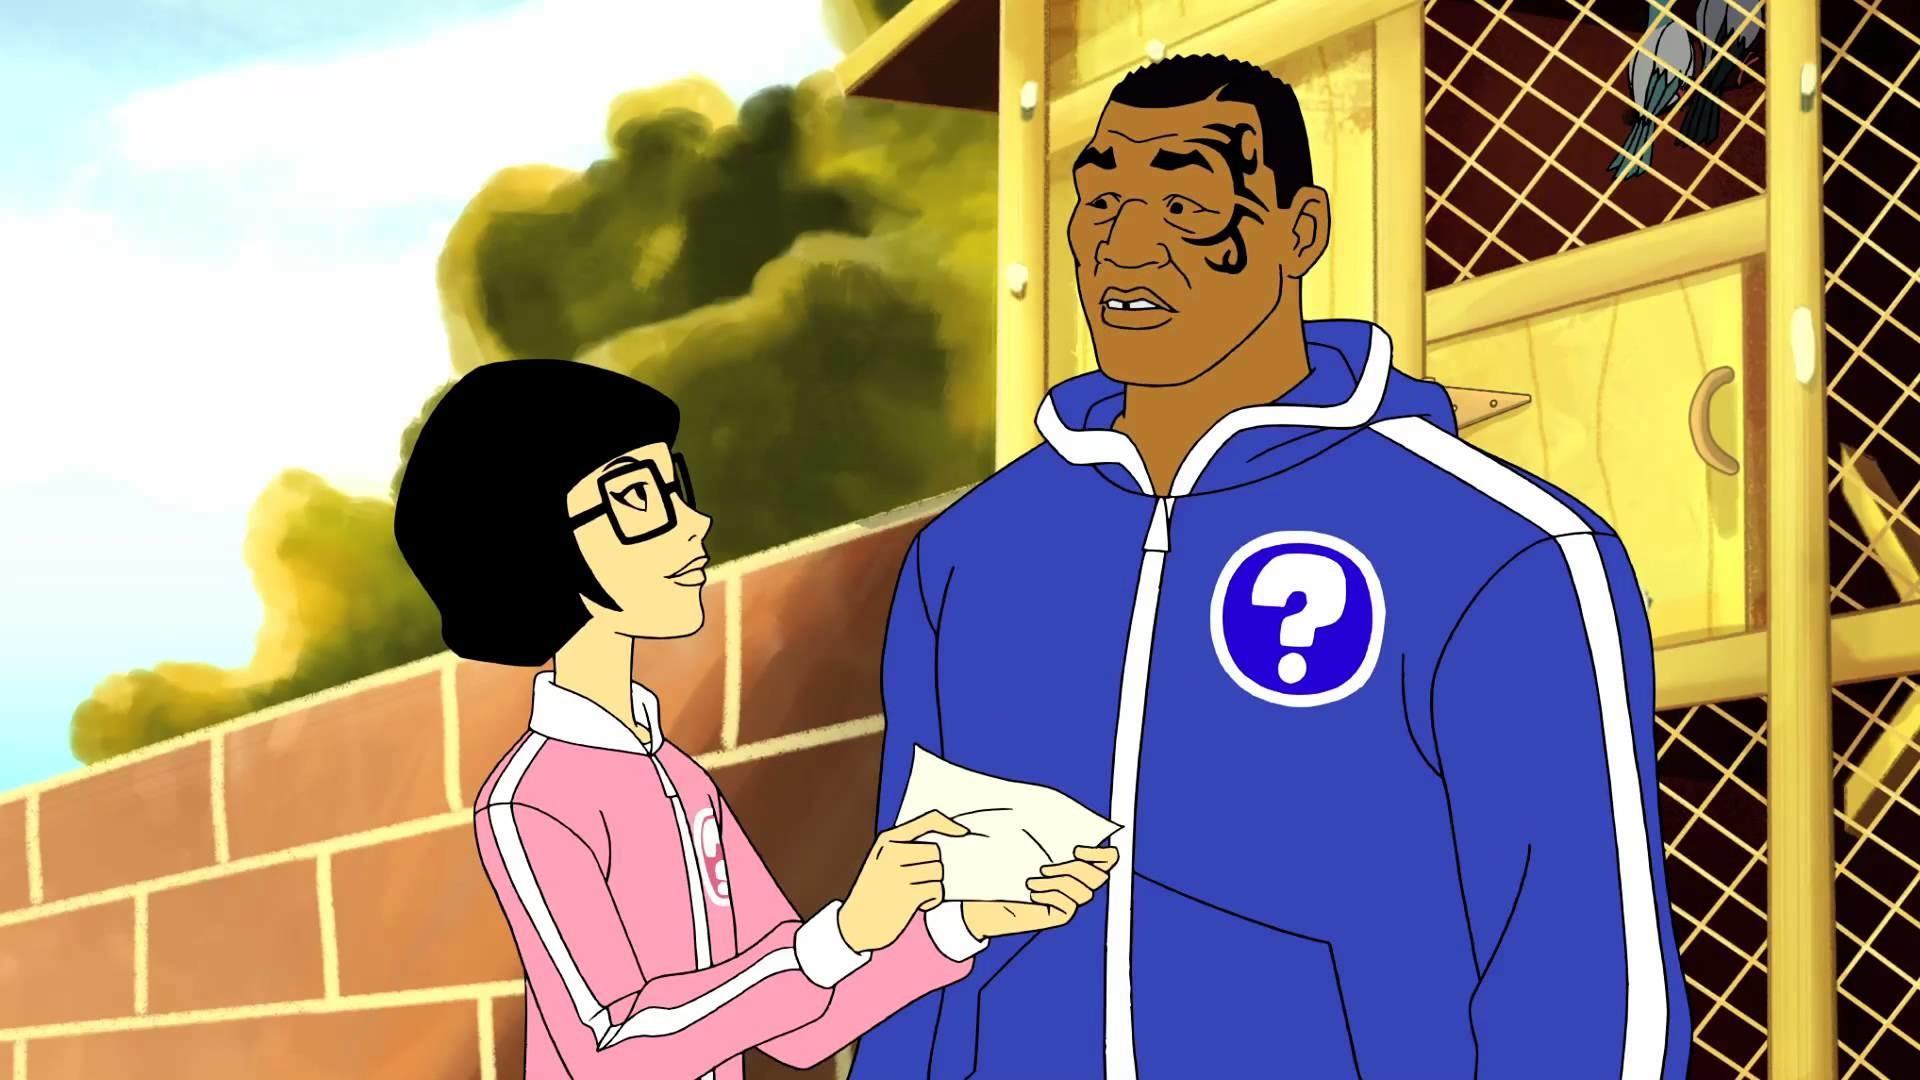 Mike Tyson Mysteries Download Hd Wallpapers, Mike Tyson Mysteries, Cartoons